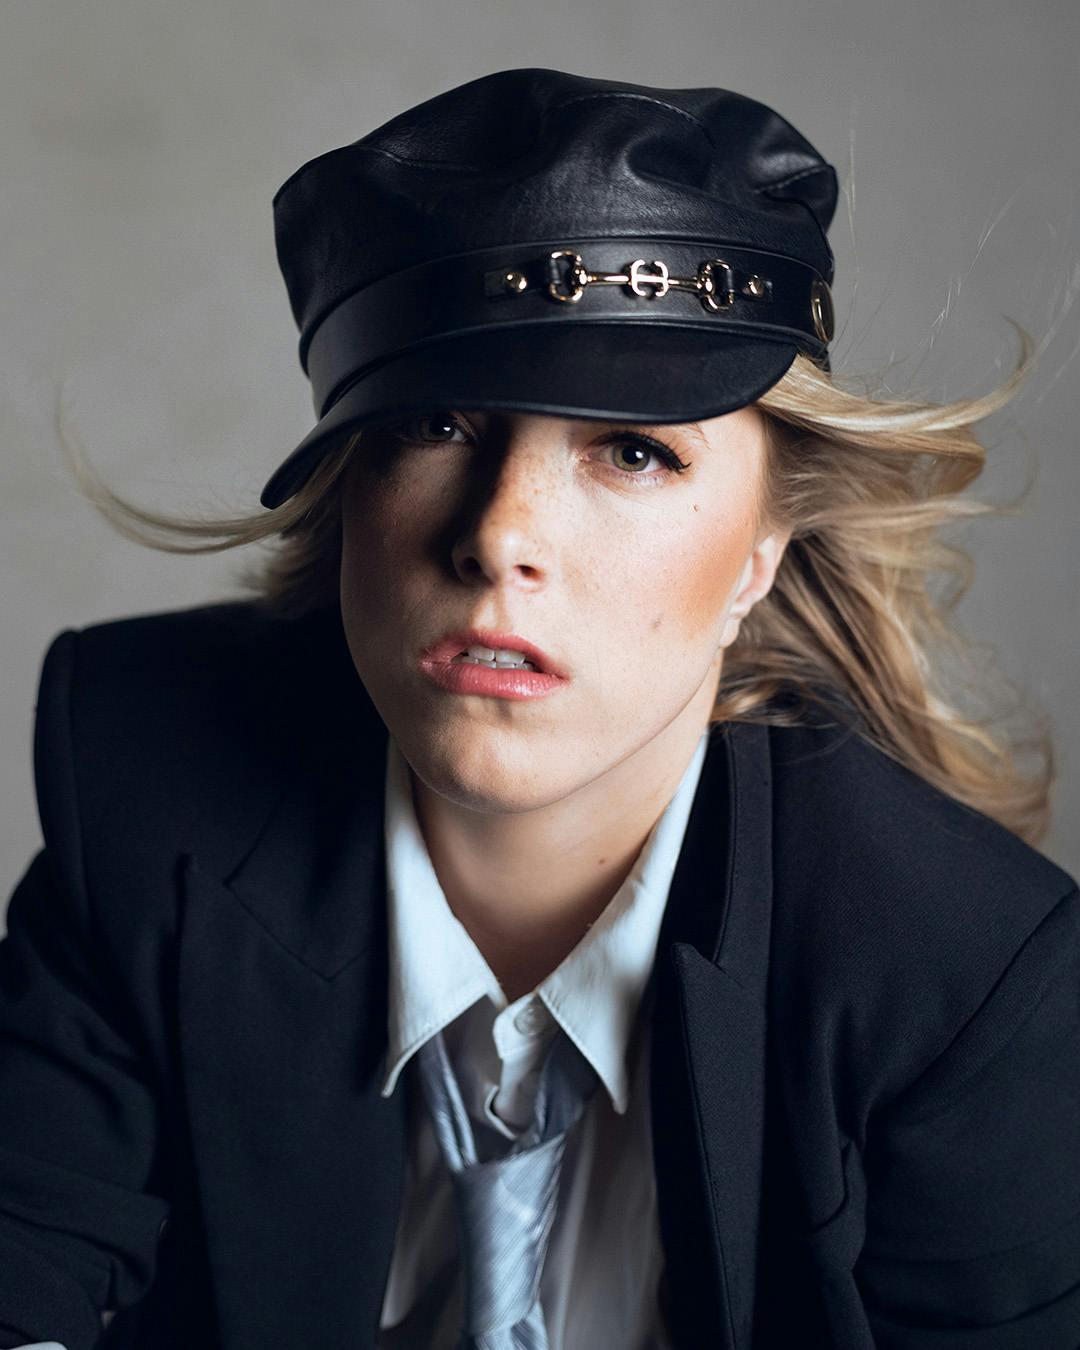 Theatrical headshot of girl wearing suit and black hat.